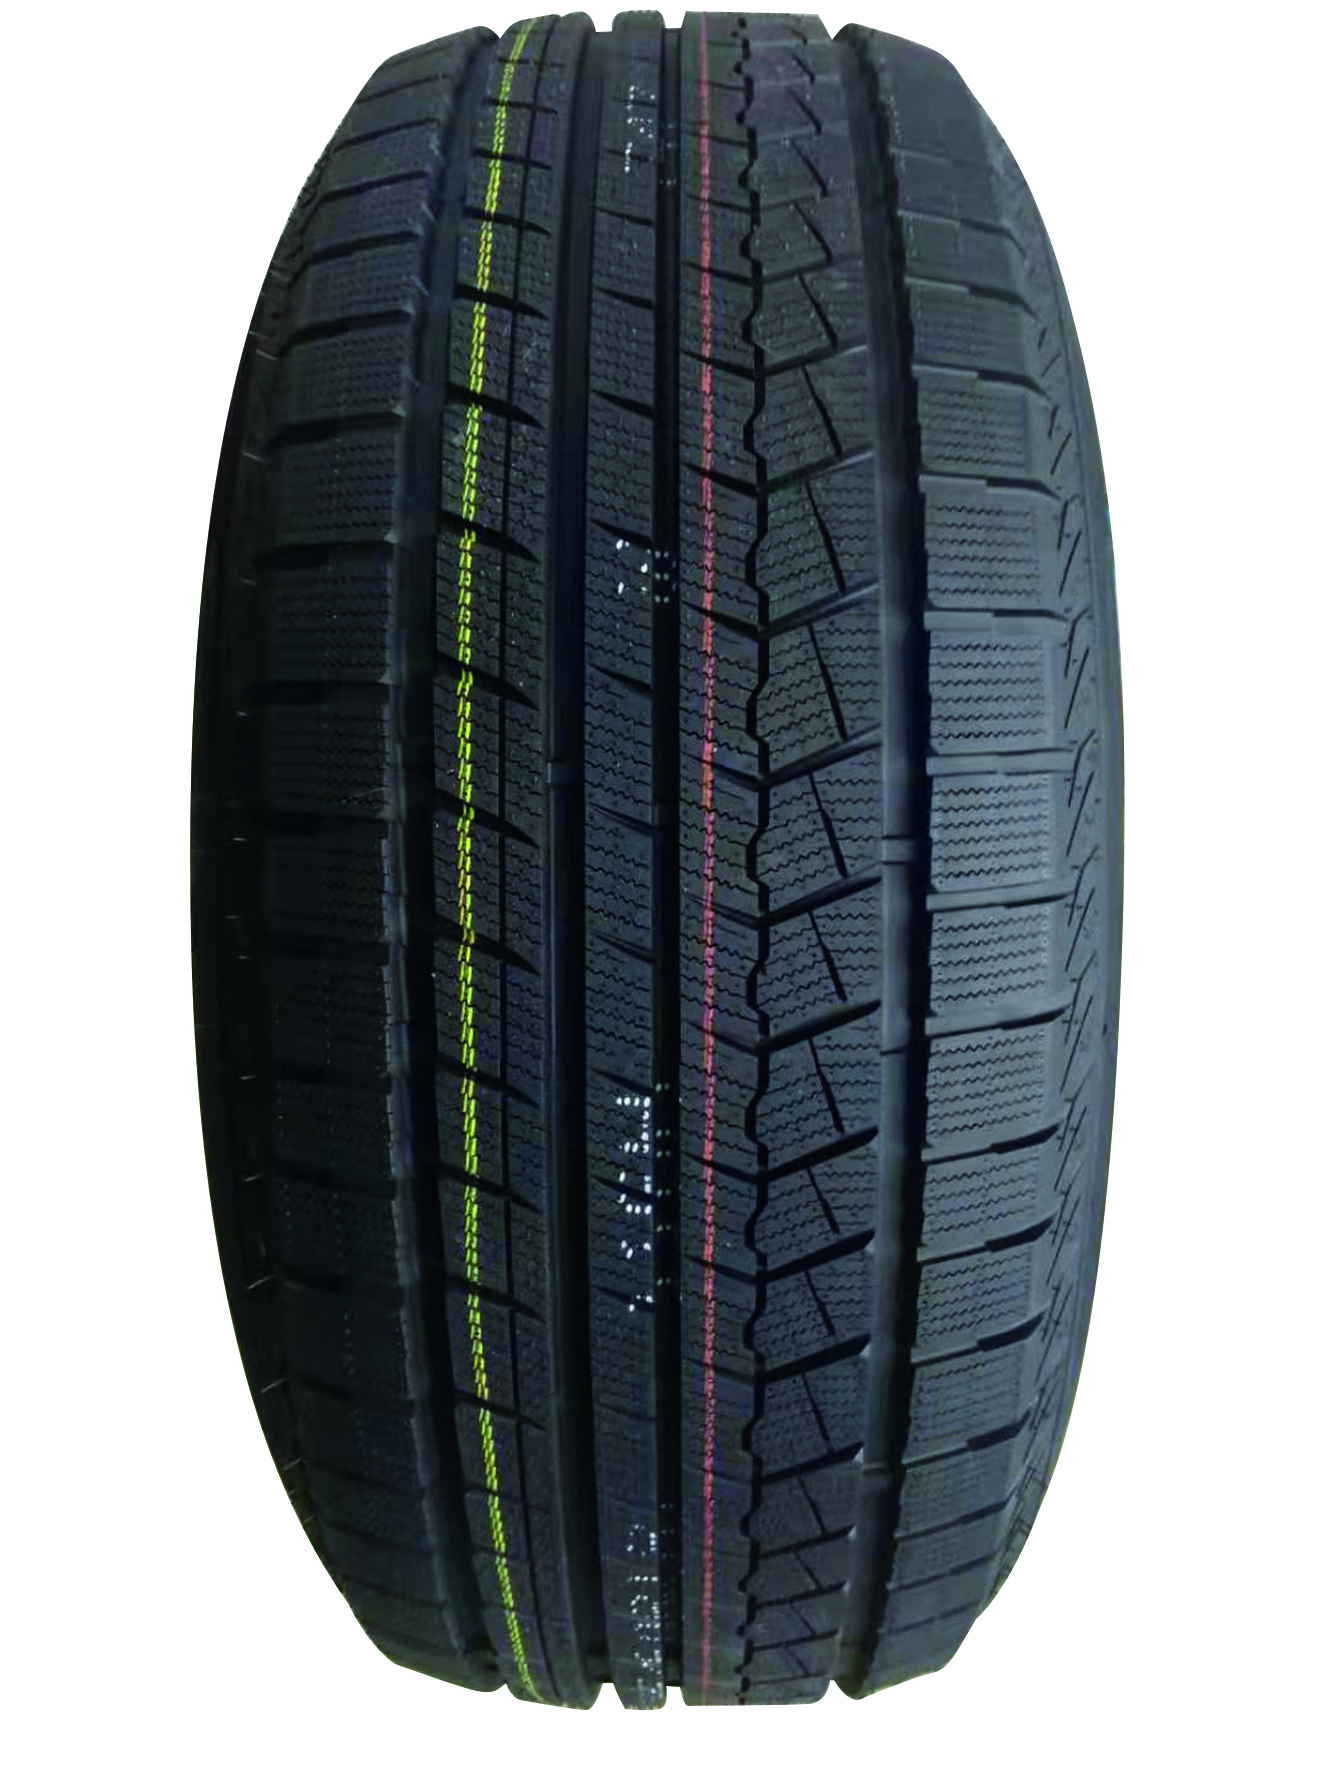 Gomme Nuove T-Tyre 155/70 R13 75T Thirtytwo M+S pneumatici nuovi Invernale